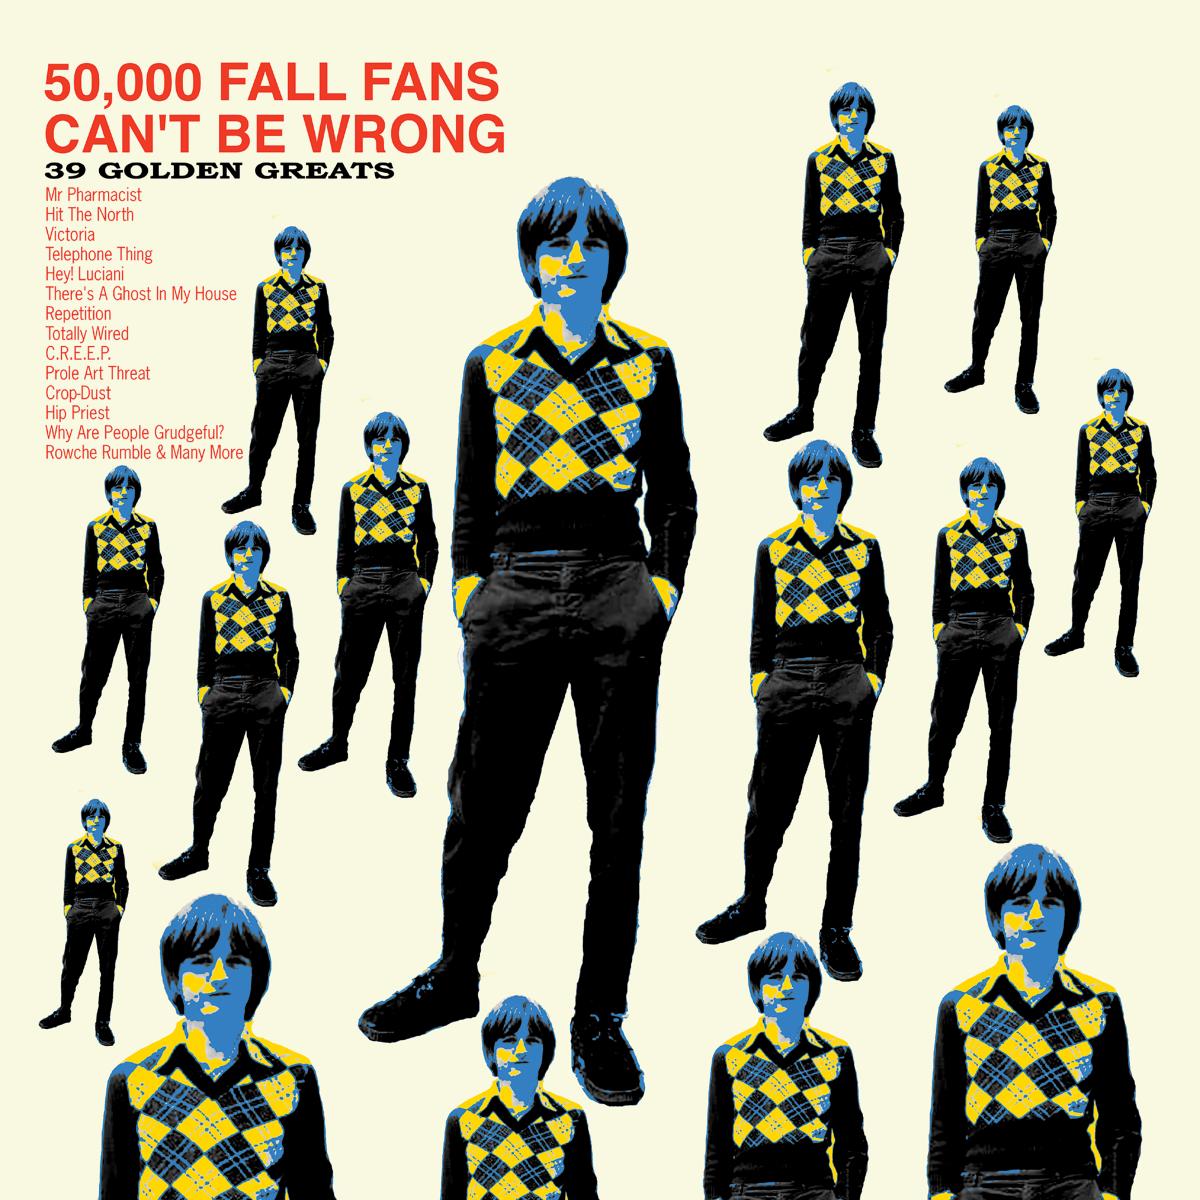 The Fall | 50,000 Fall Fans Can't Be Wrong (39 Golden Greats) | CD